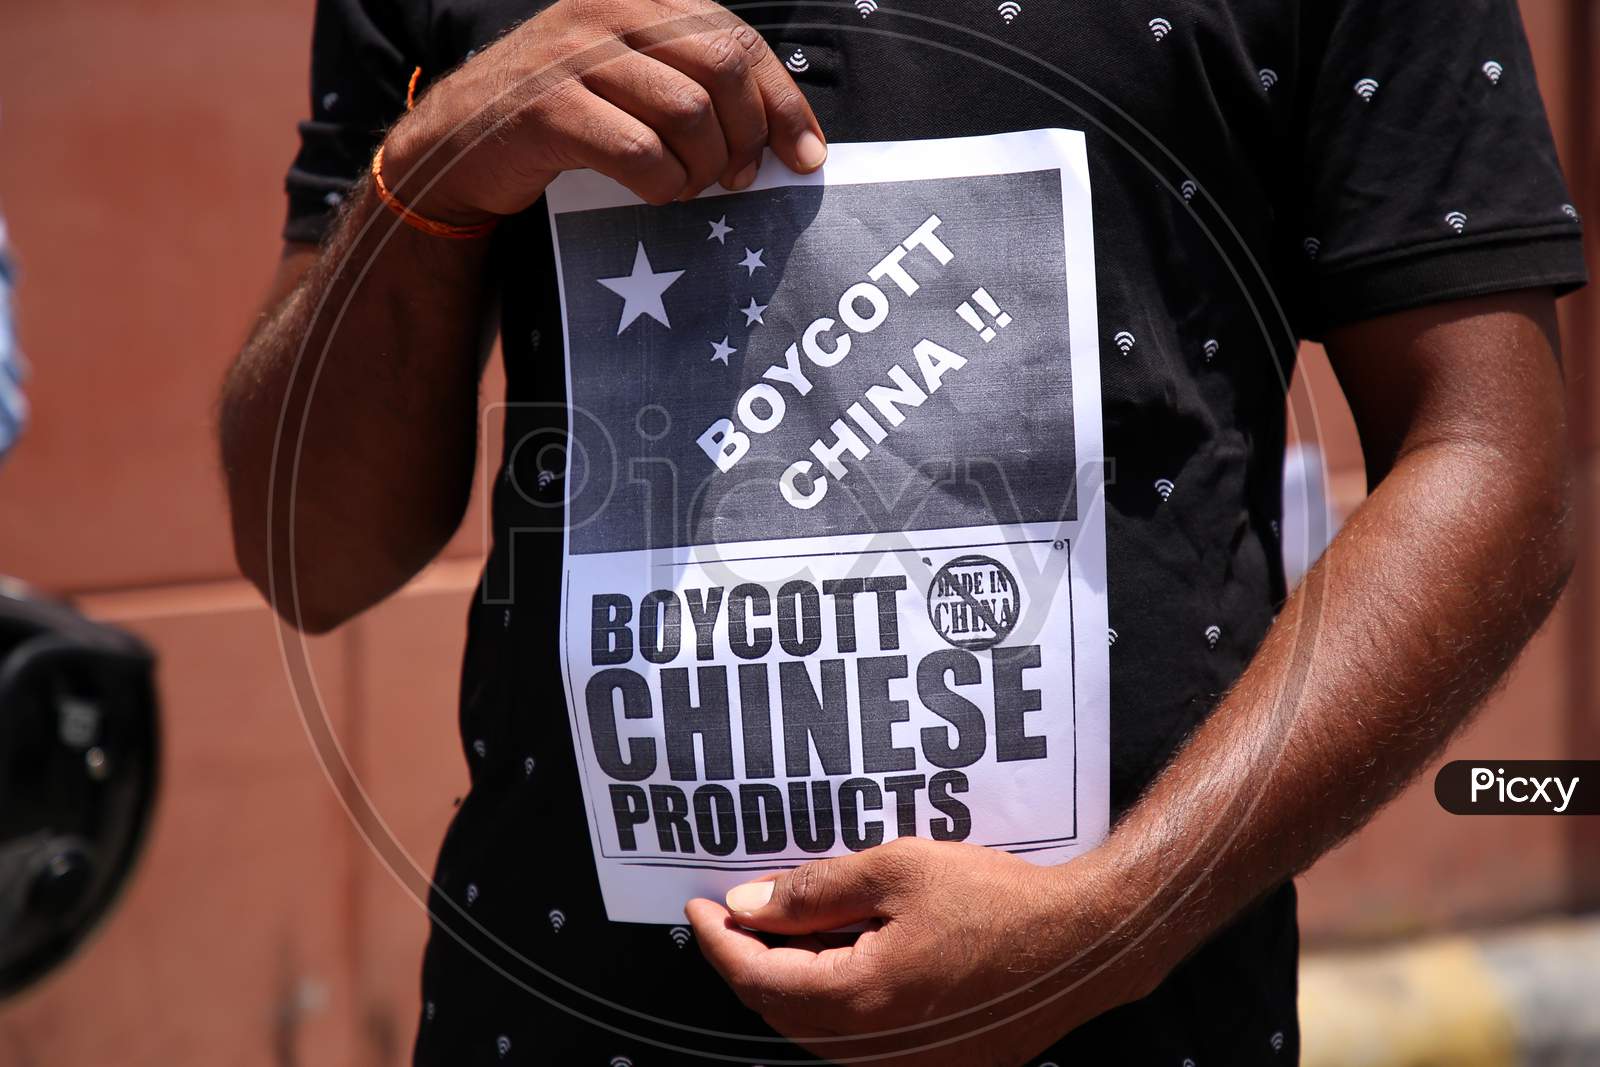 Indian People Protest Against China On Indo-China Clash At Galwan Valley In Ladakh, In Ajmer, Rajasthan, India On June 17, 2020.